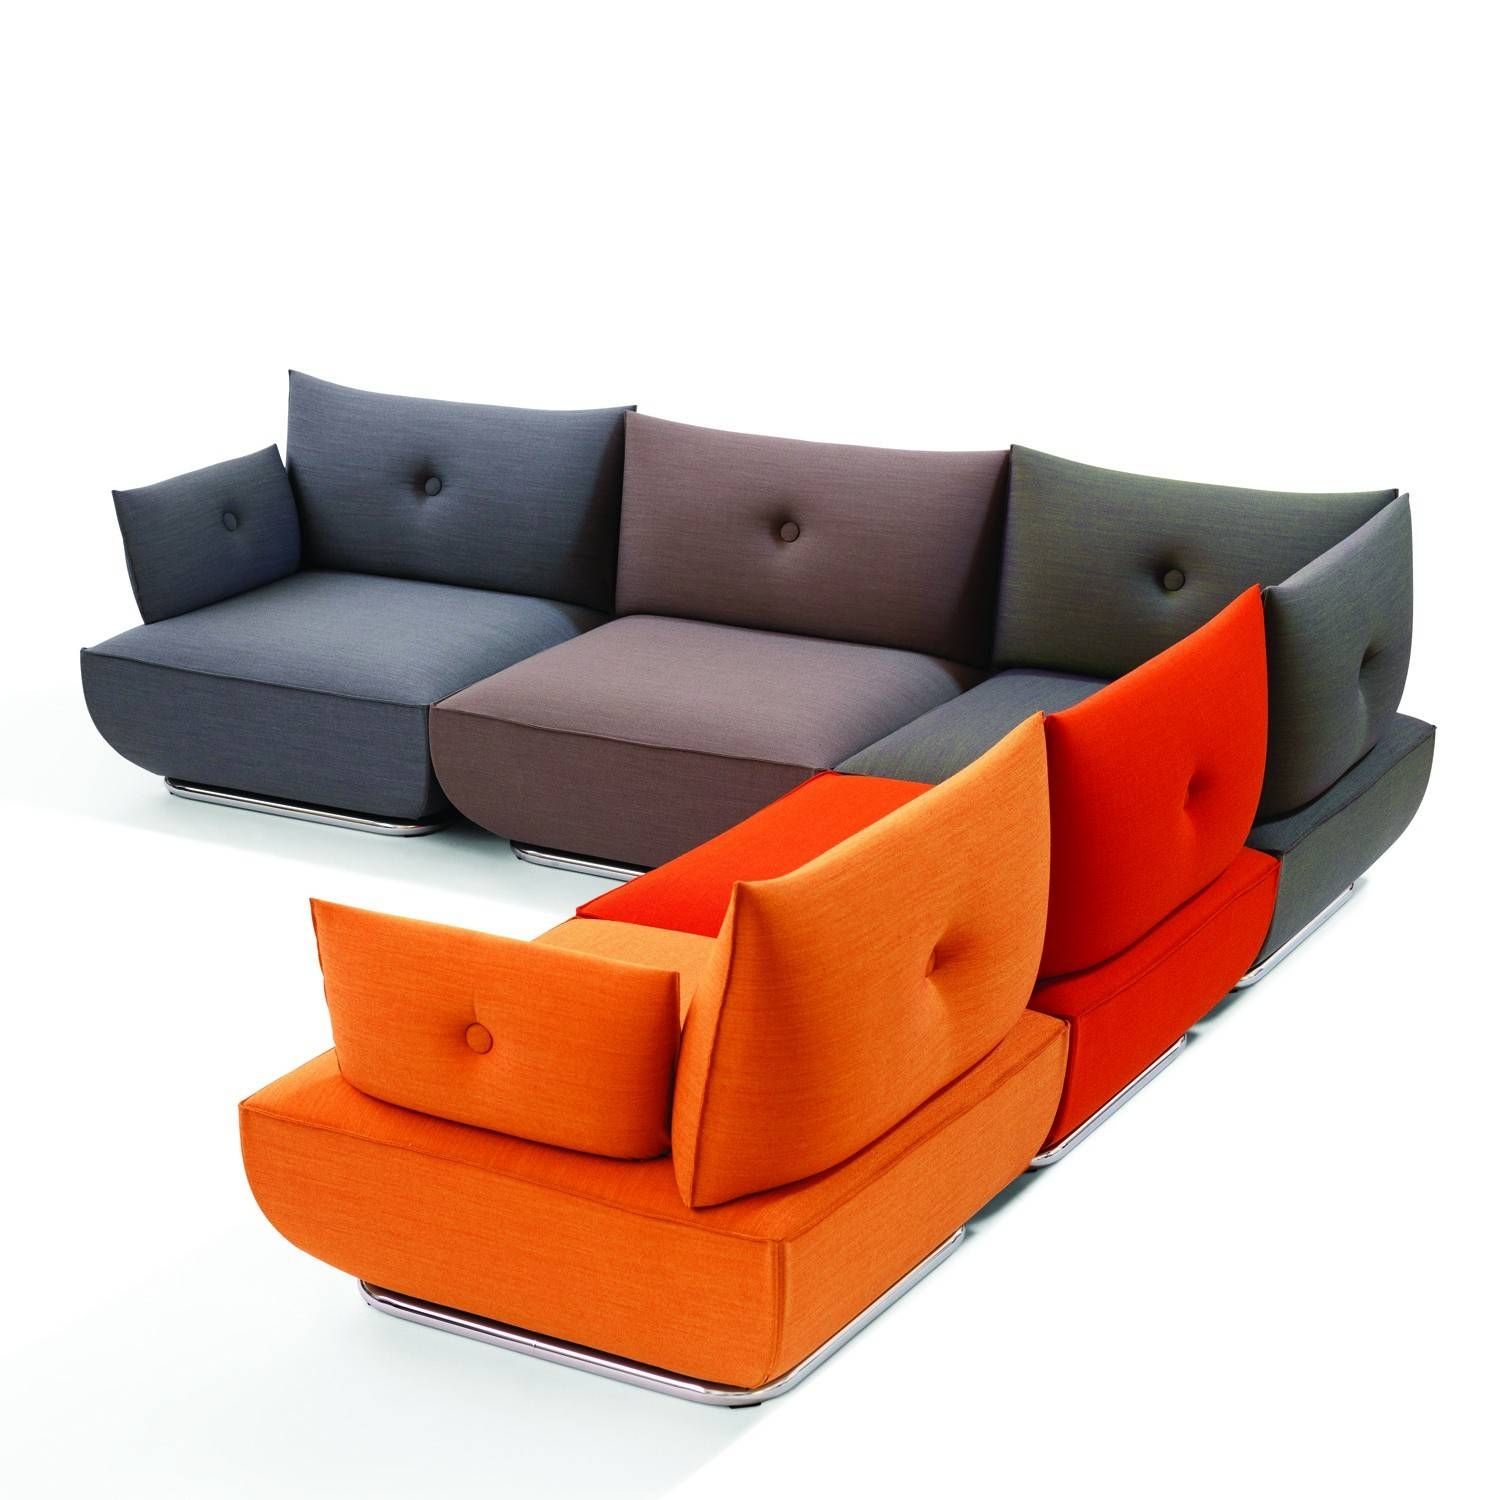 Luxury Modular Sofa 97 With Additional Sofa Design Ideas With For Modular Sofas (View 5 of 15)